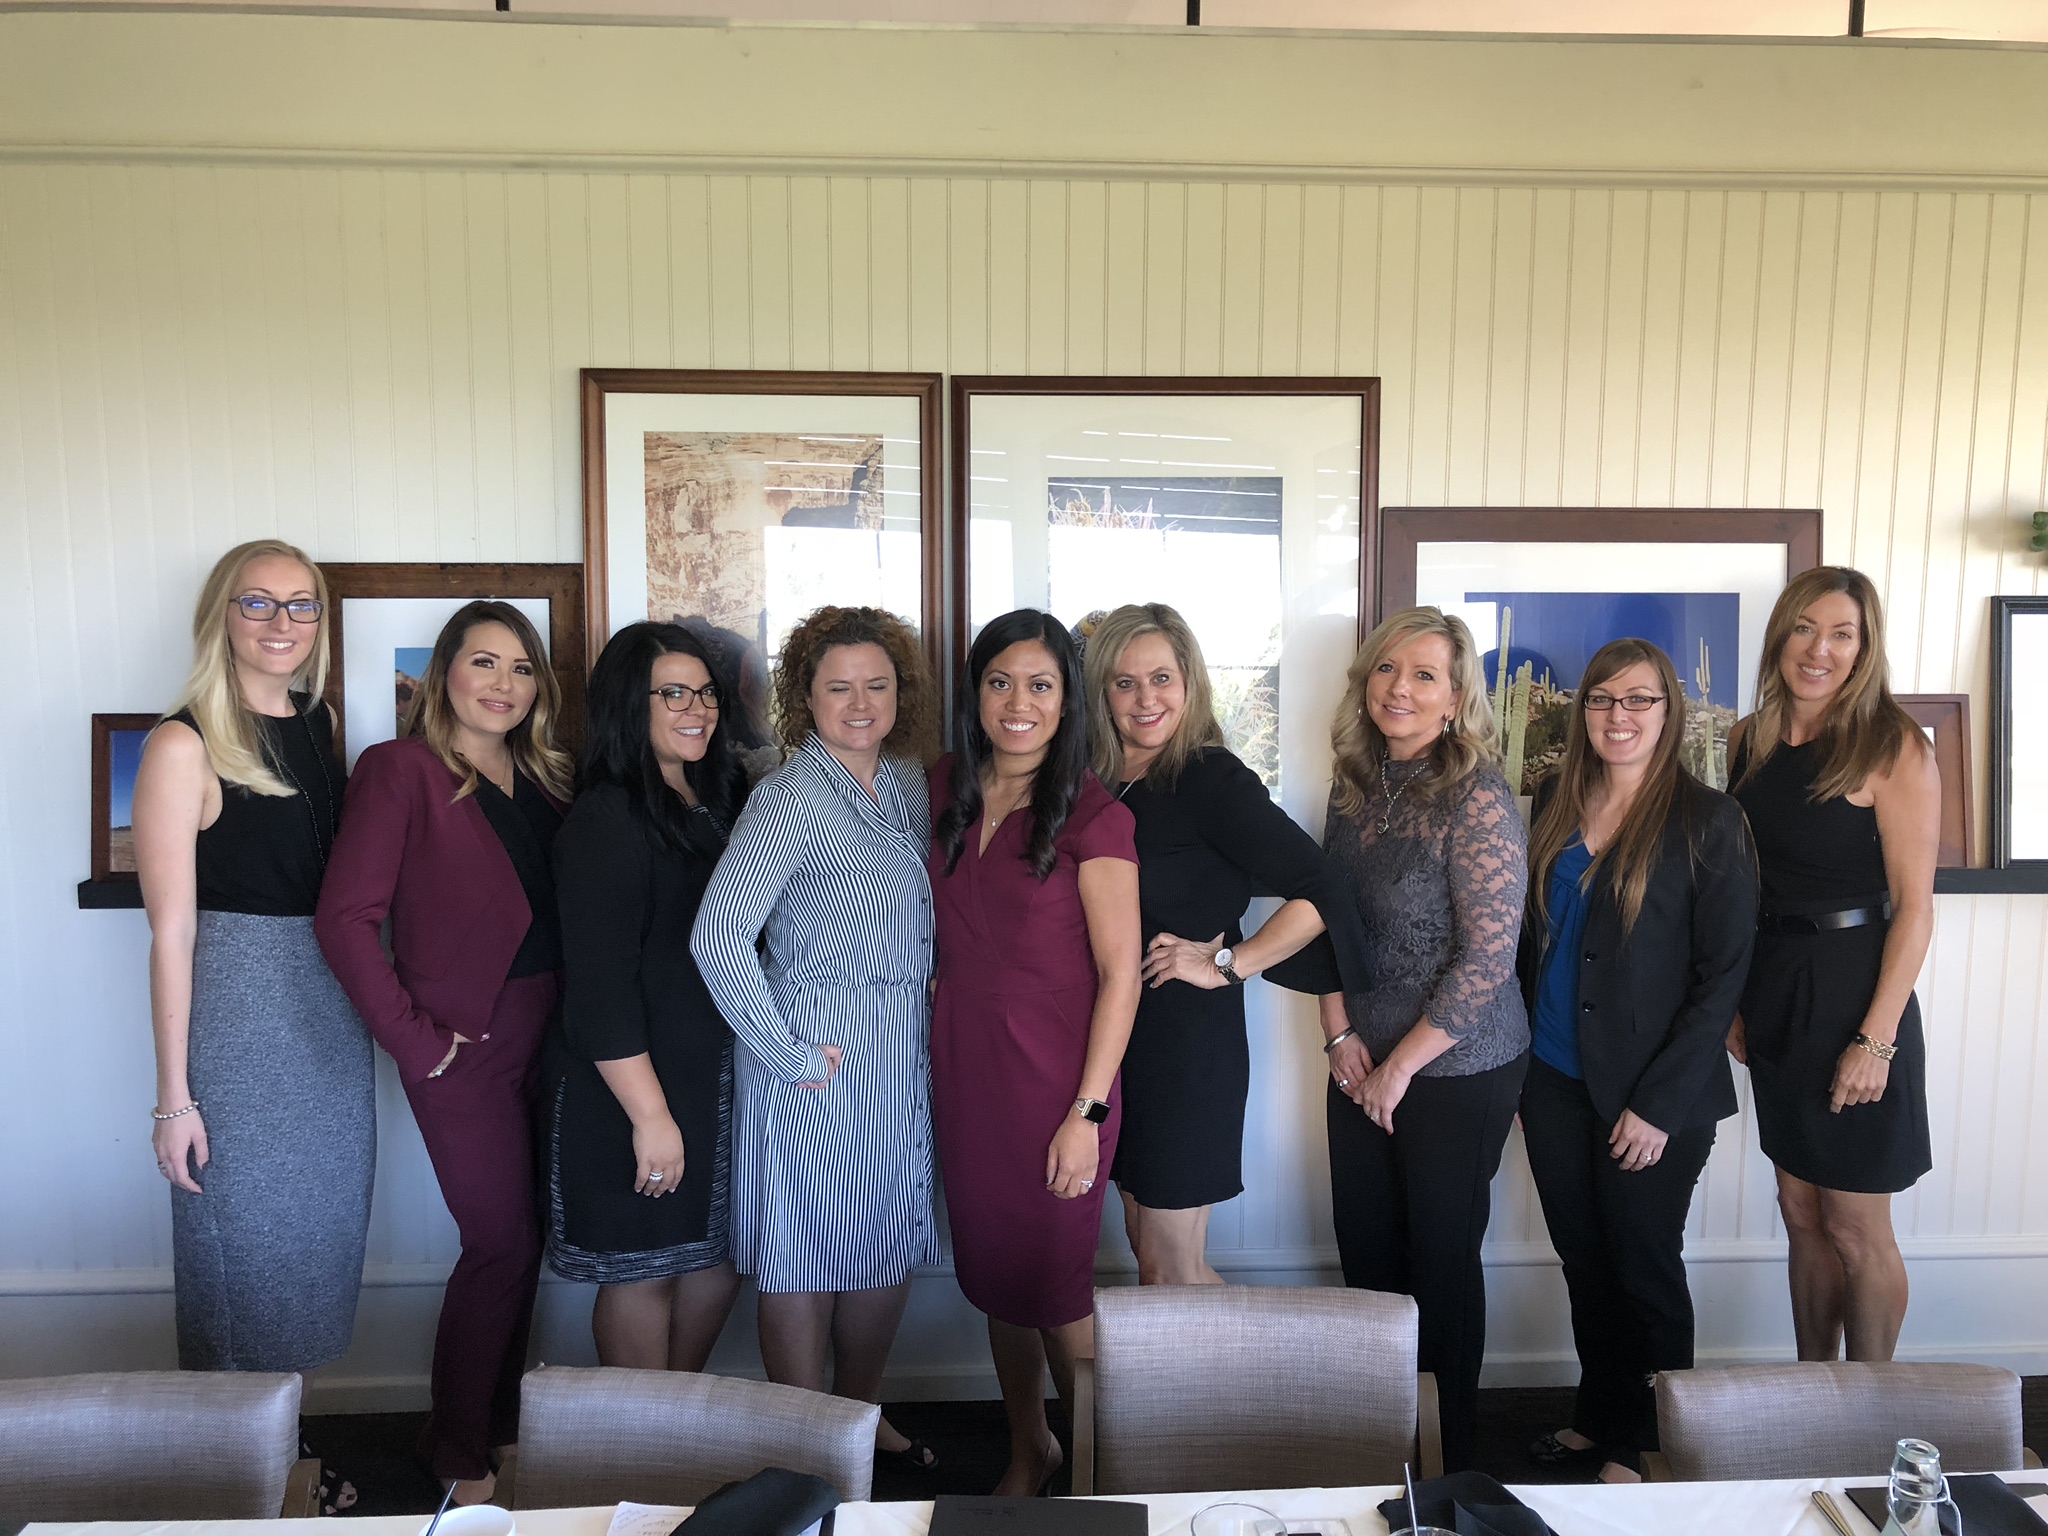  Pictured from left to right: Alissia Zenhausern, Angela Lowery, Analise Zaremba, Unknown, North Scottsdale Chapter Head Rea Mayer, Lisa Payne, Unknown, Unknown, and Susan Underwood. 